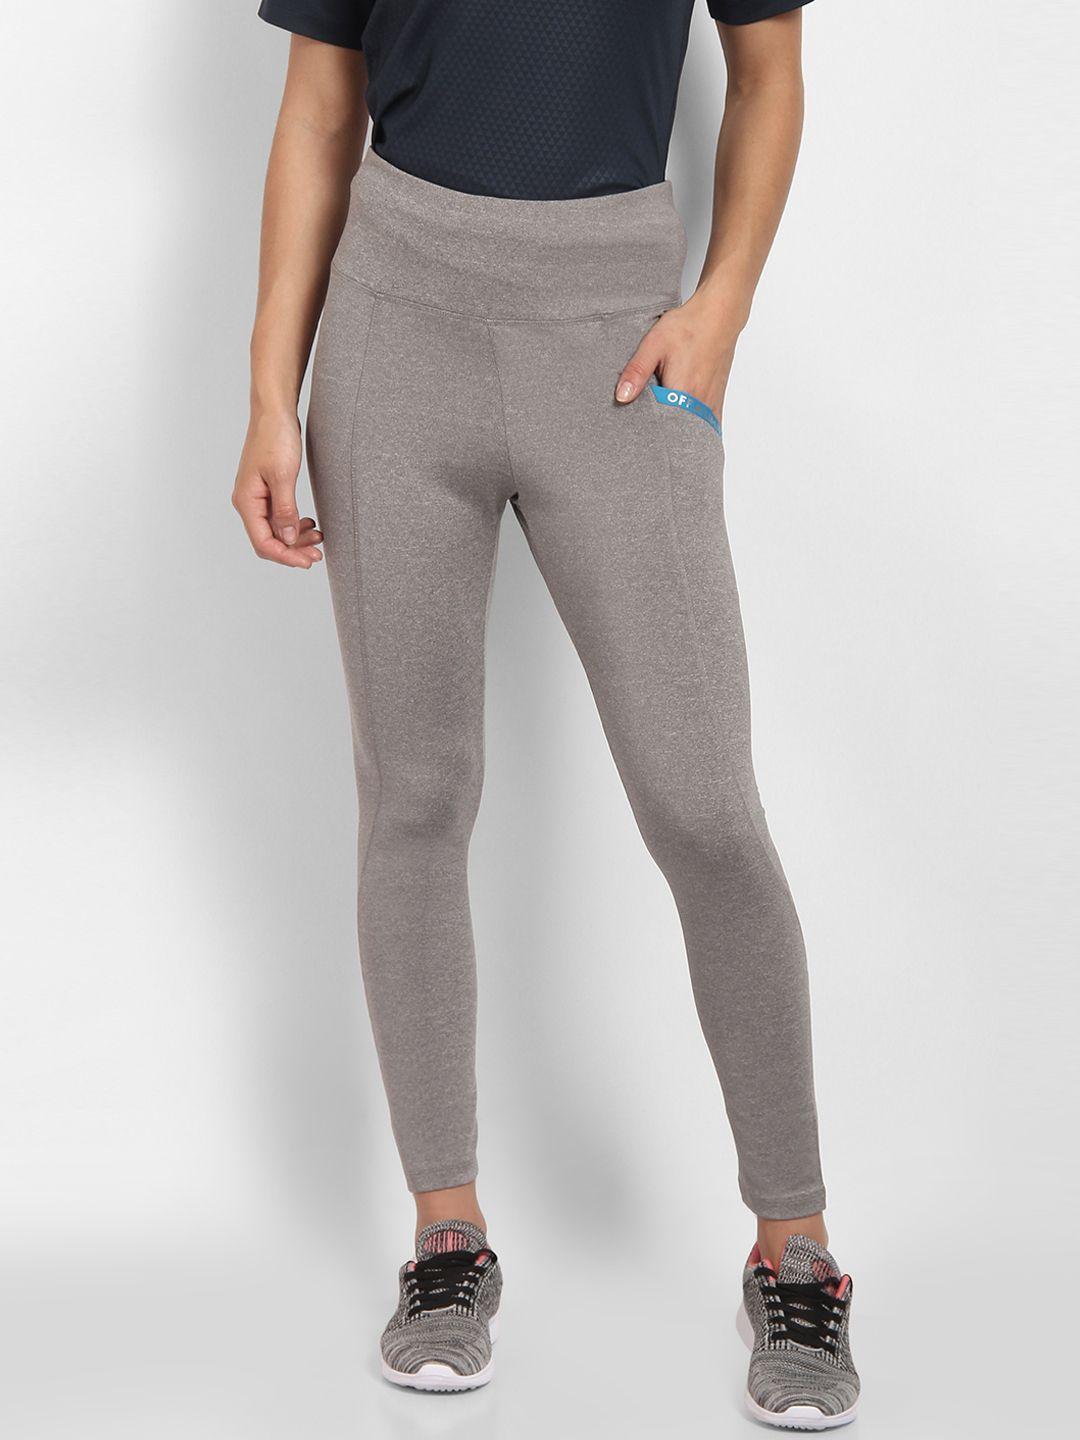 off limits women grey solid tights